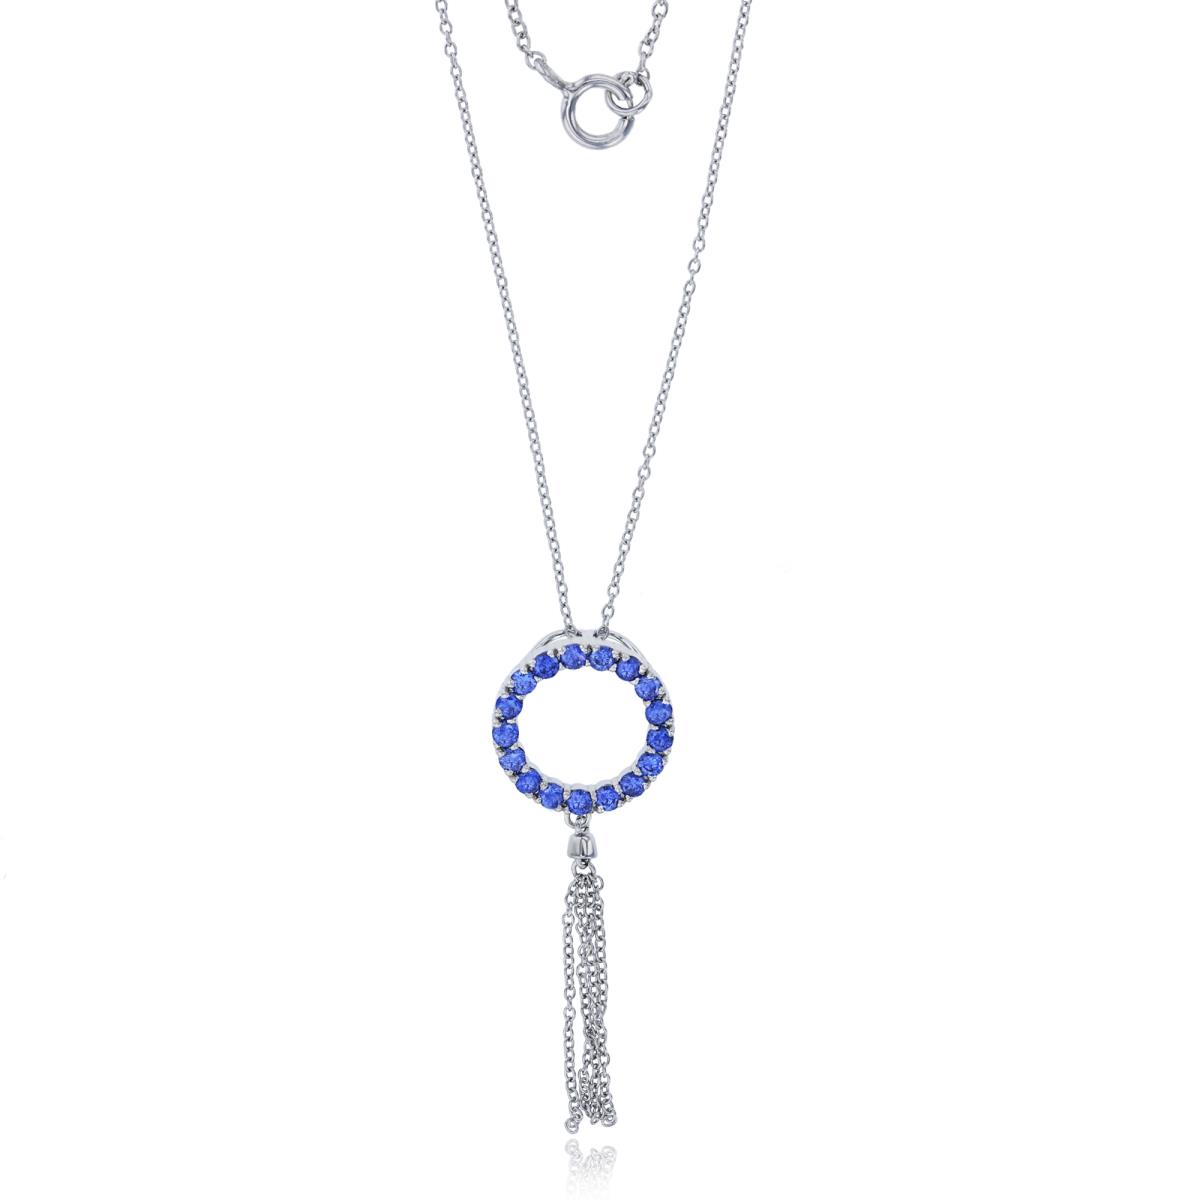 Sterling Silver Rhodium Pave Tanzanite Open Circle & Dangling Tassle 18" Necklace